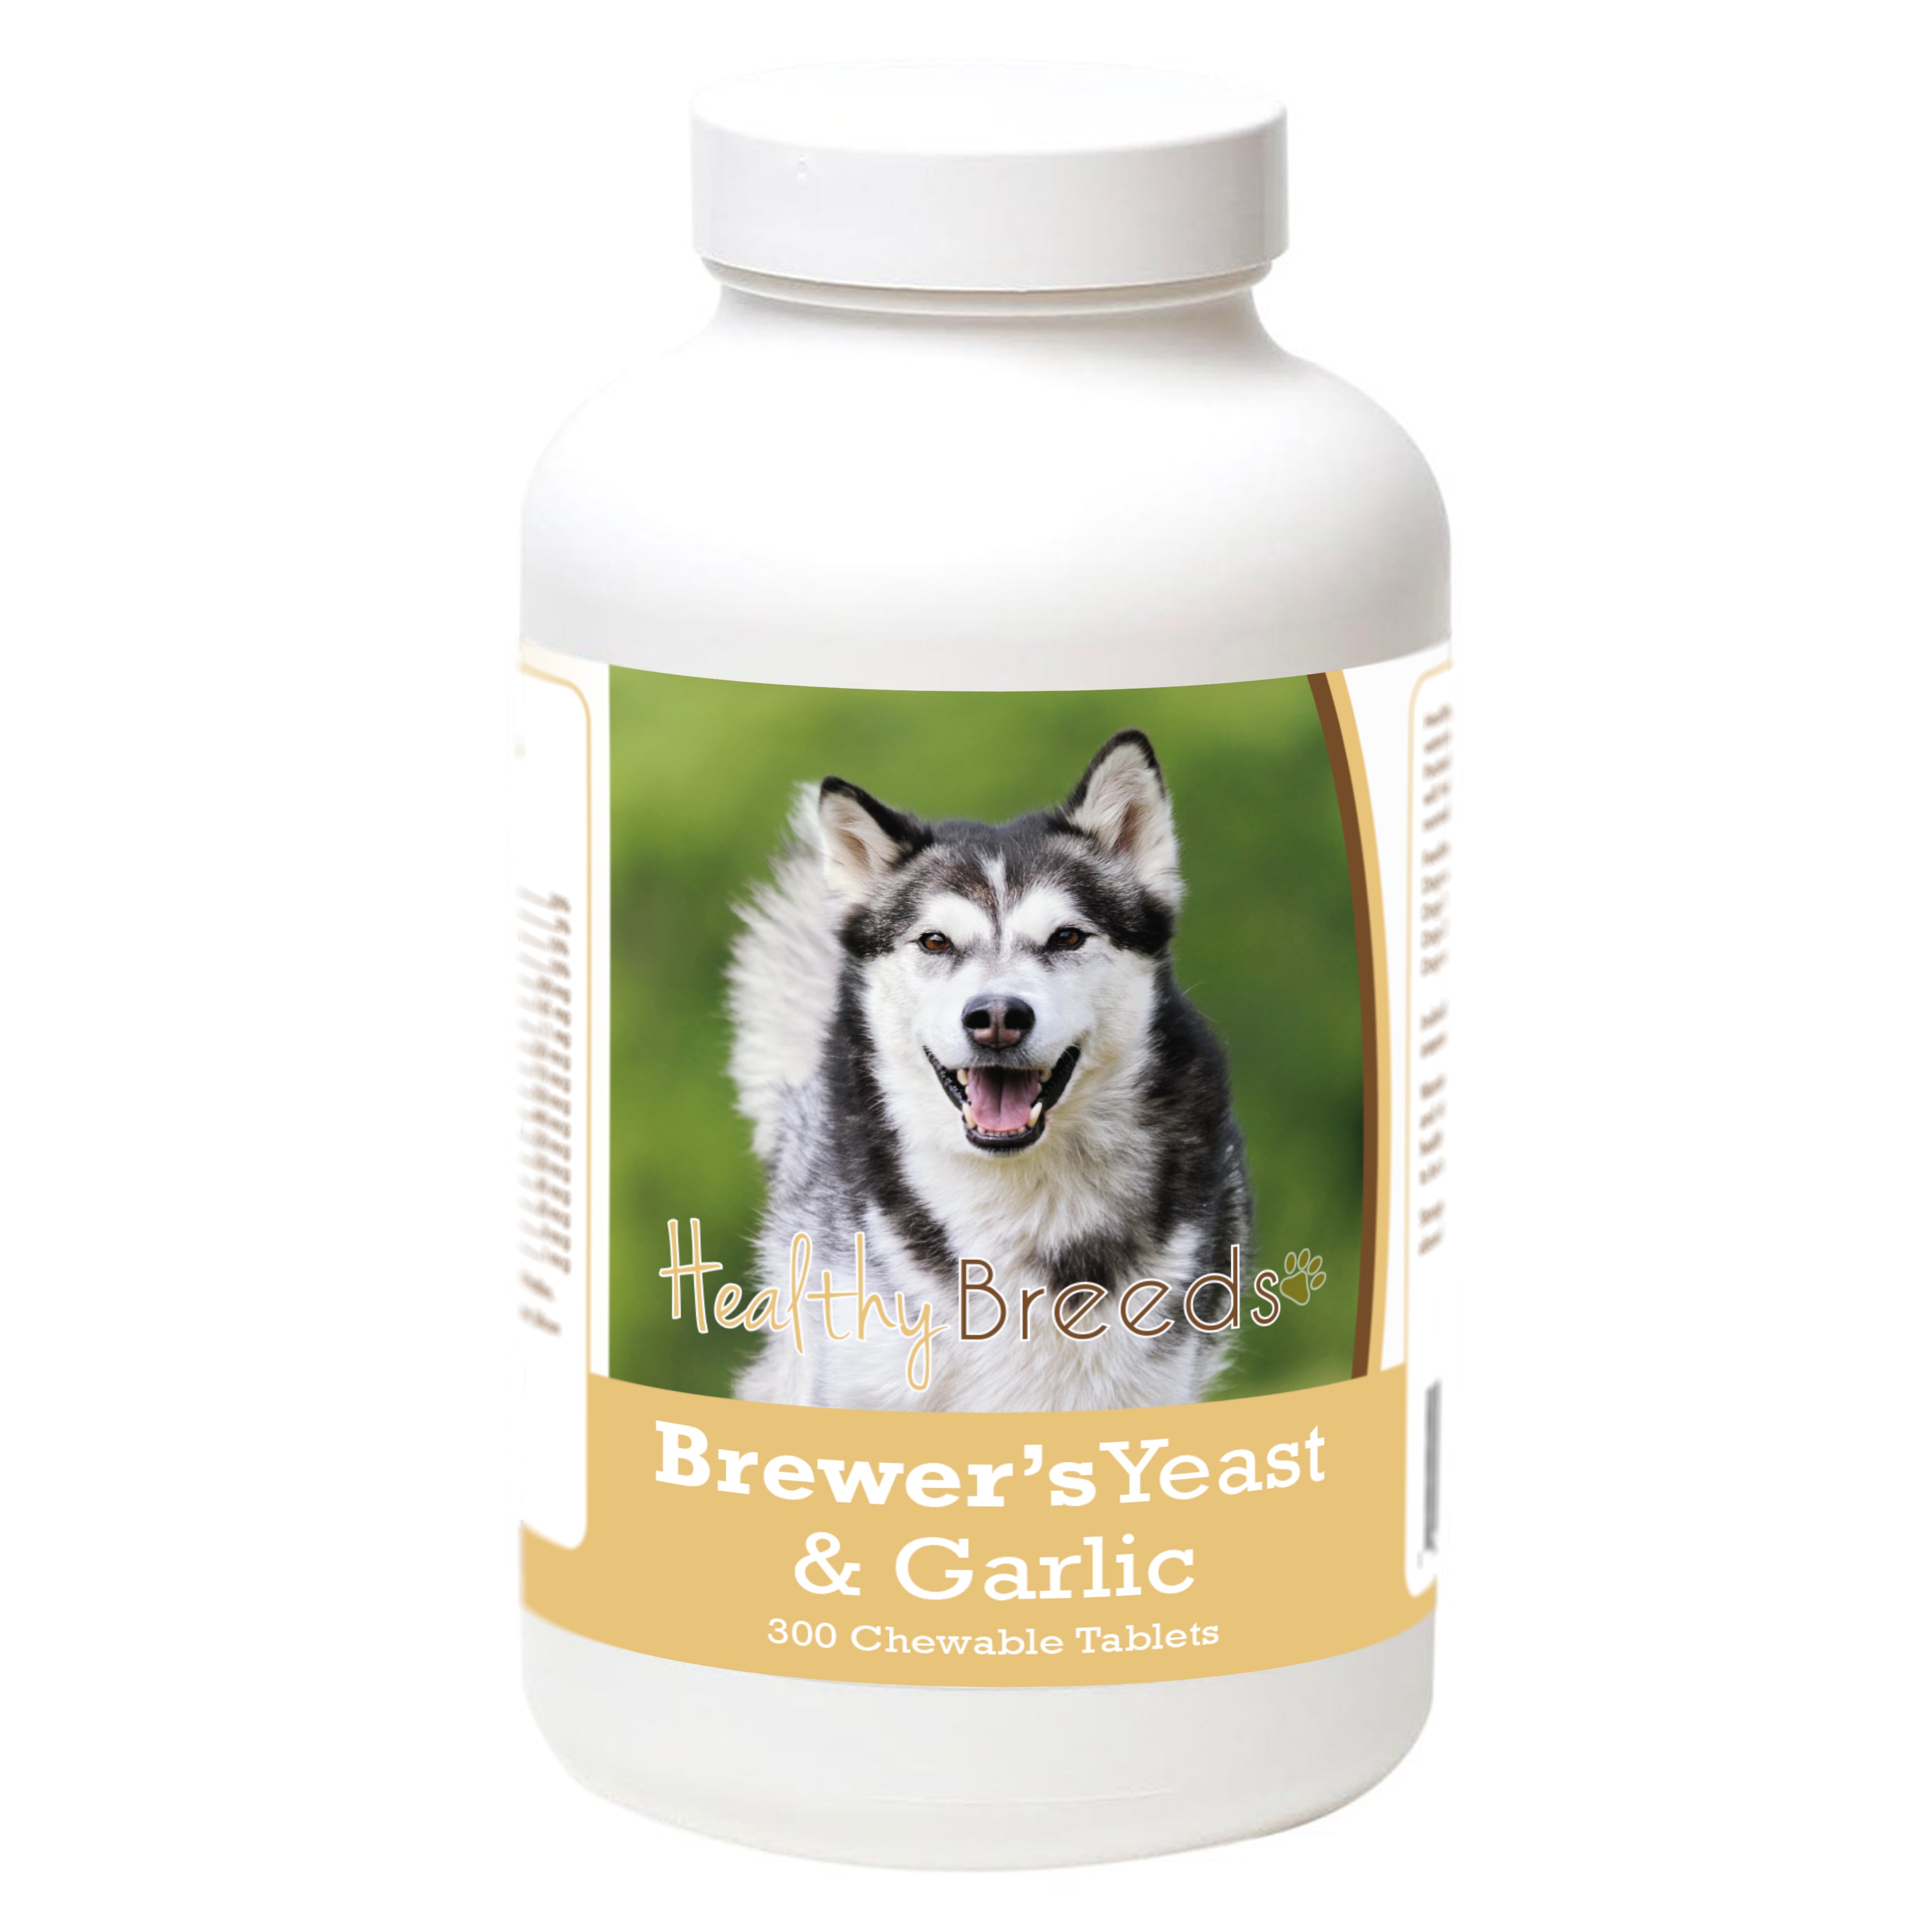 Alaskan Malamute Brewers Yeast Tablets 300 Count